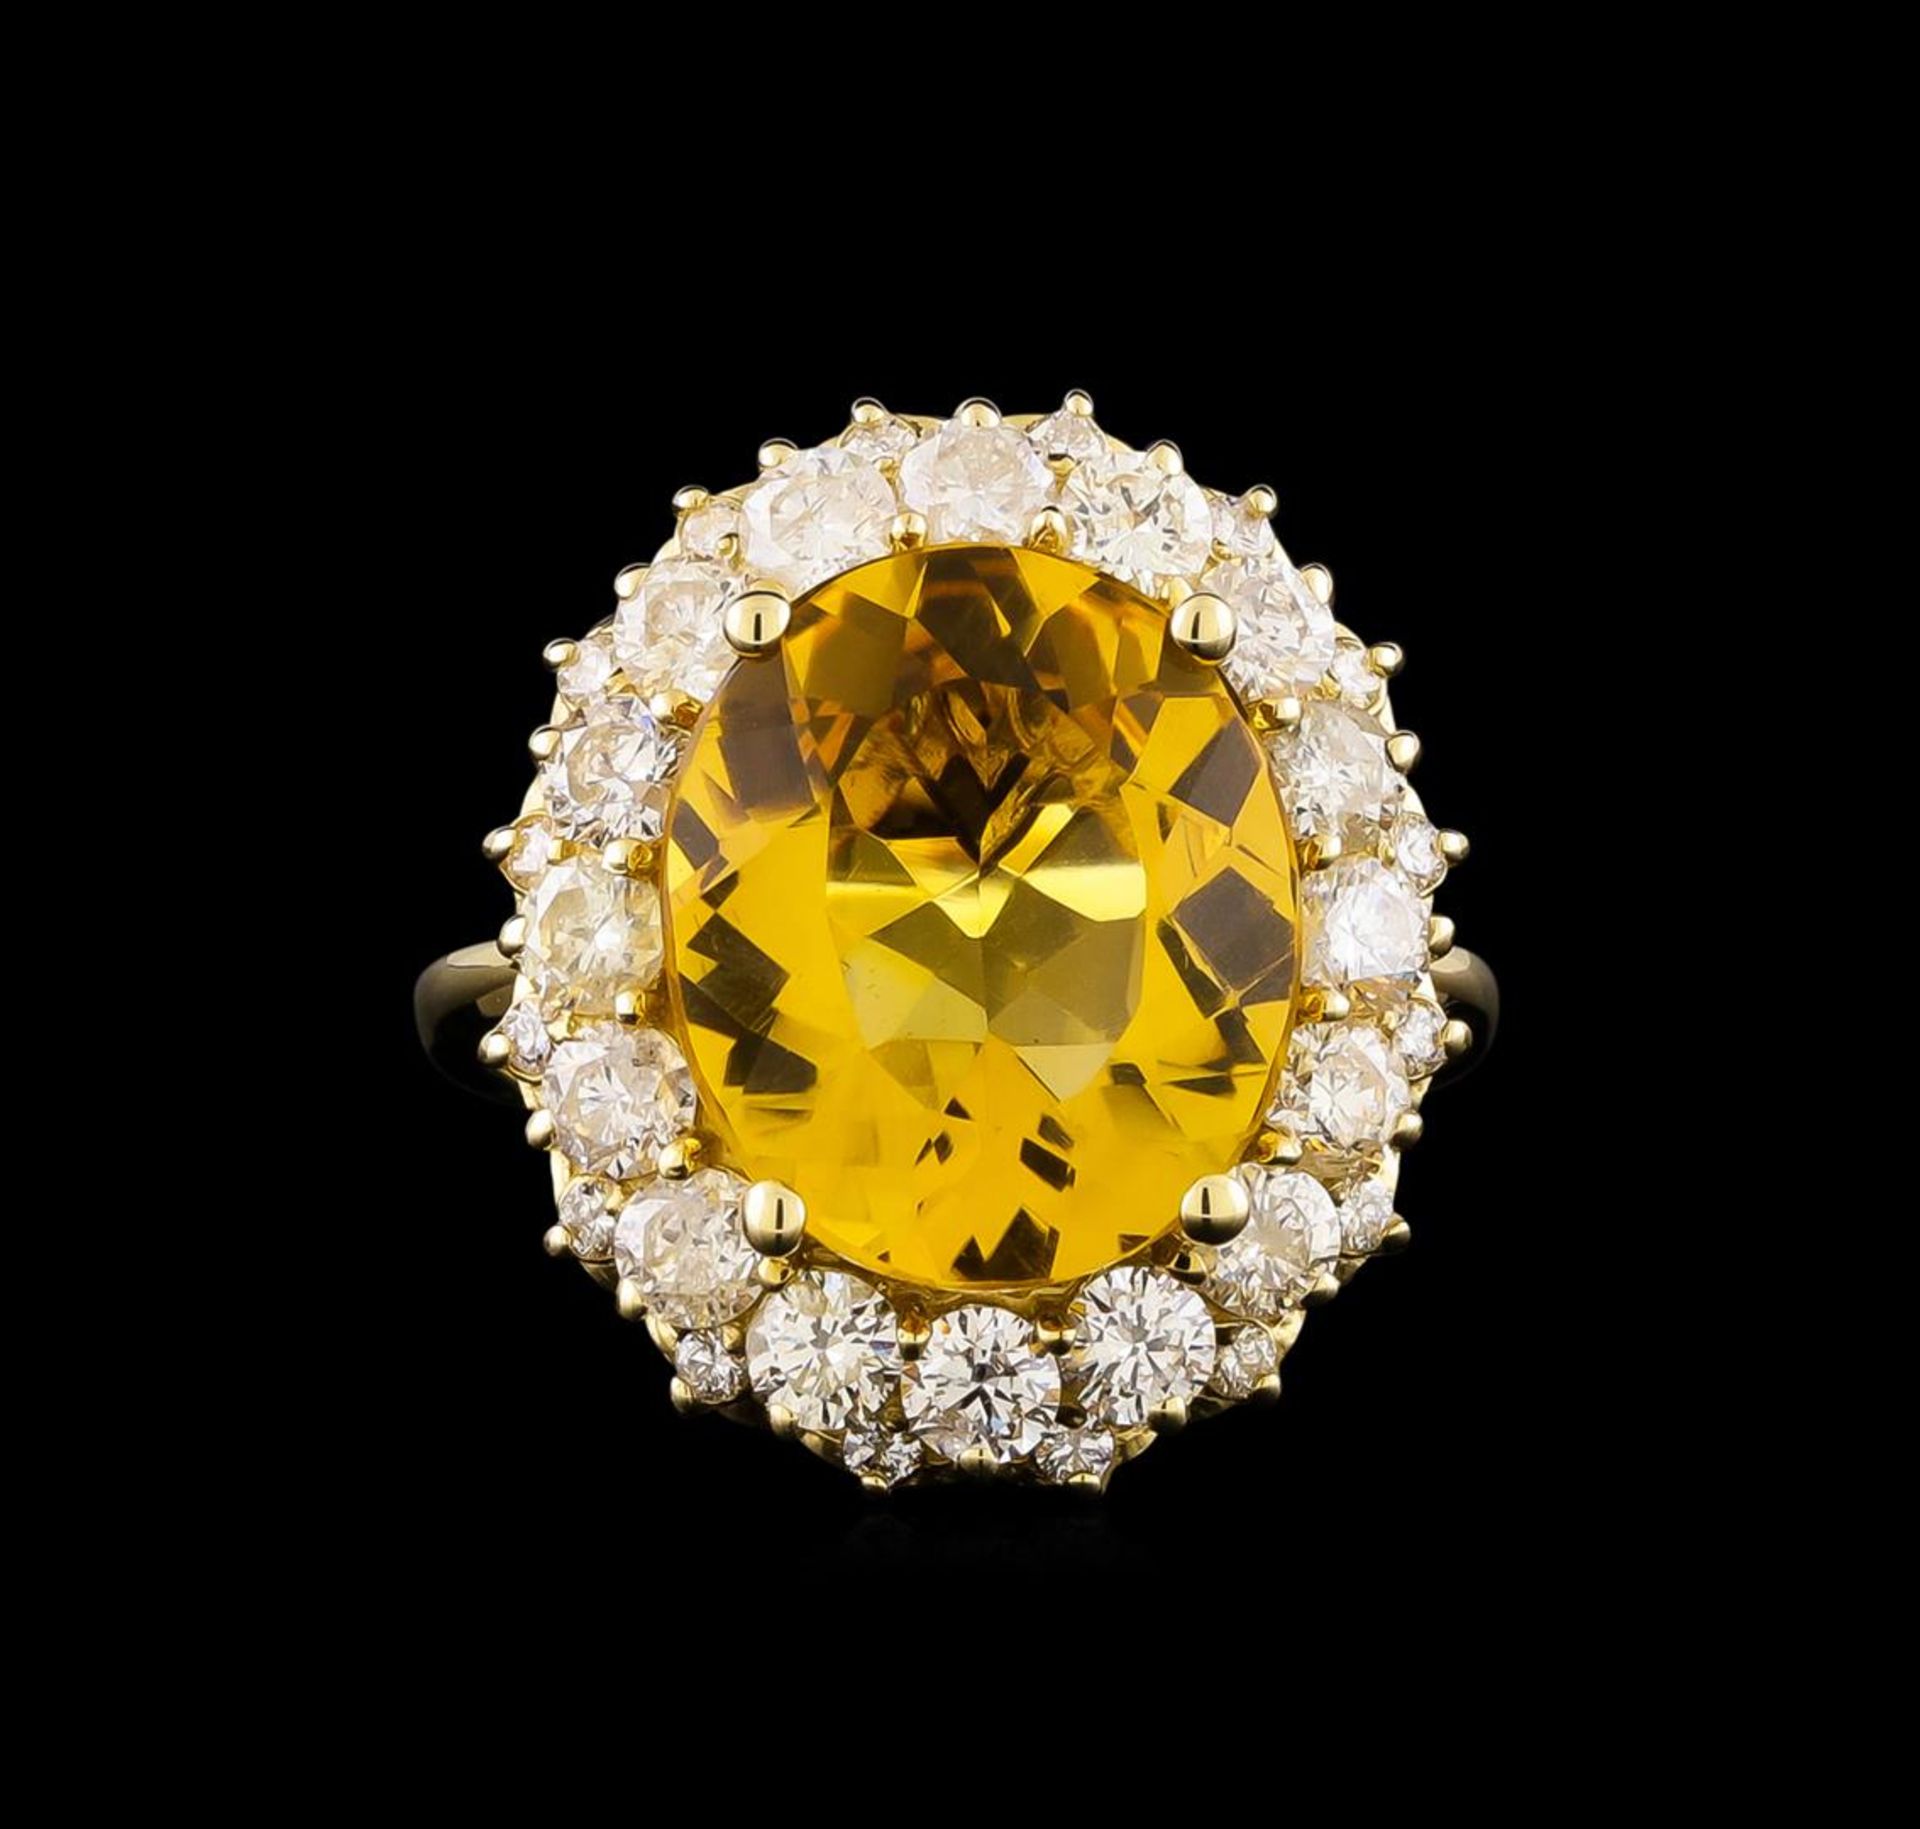 14KT Yellow Gold 6.17 ctw Citrine and Diamond Ring - Image 2 of 5